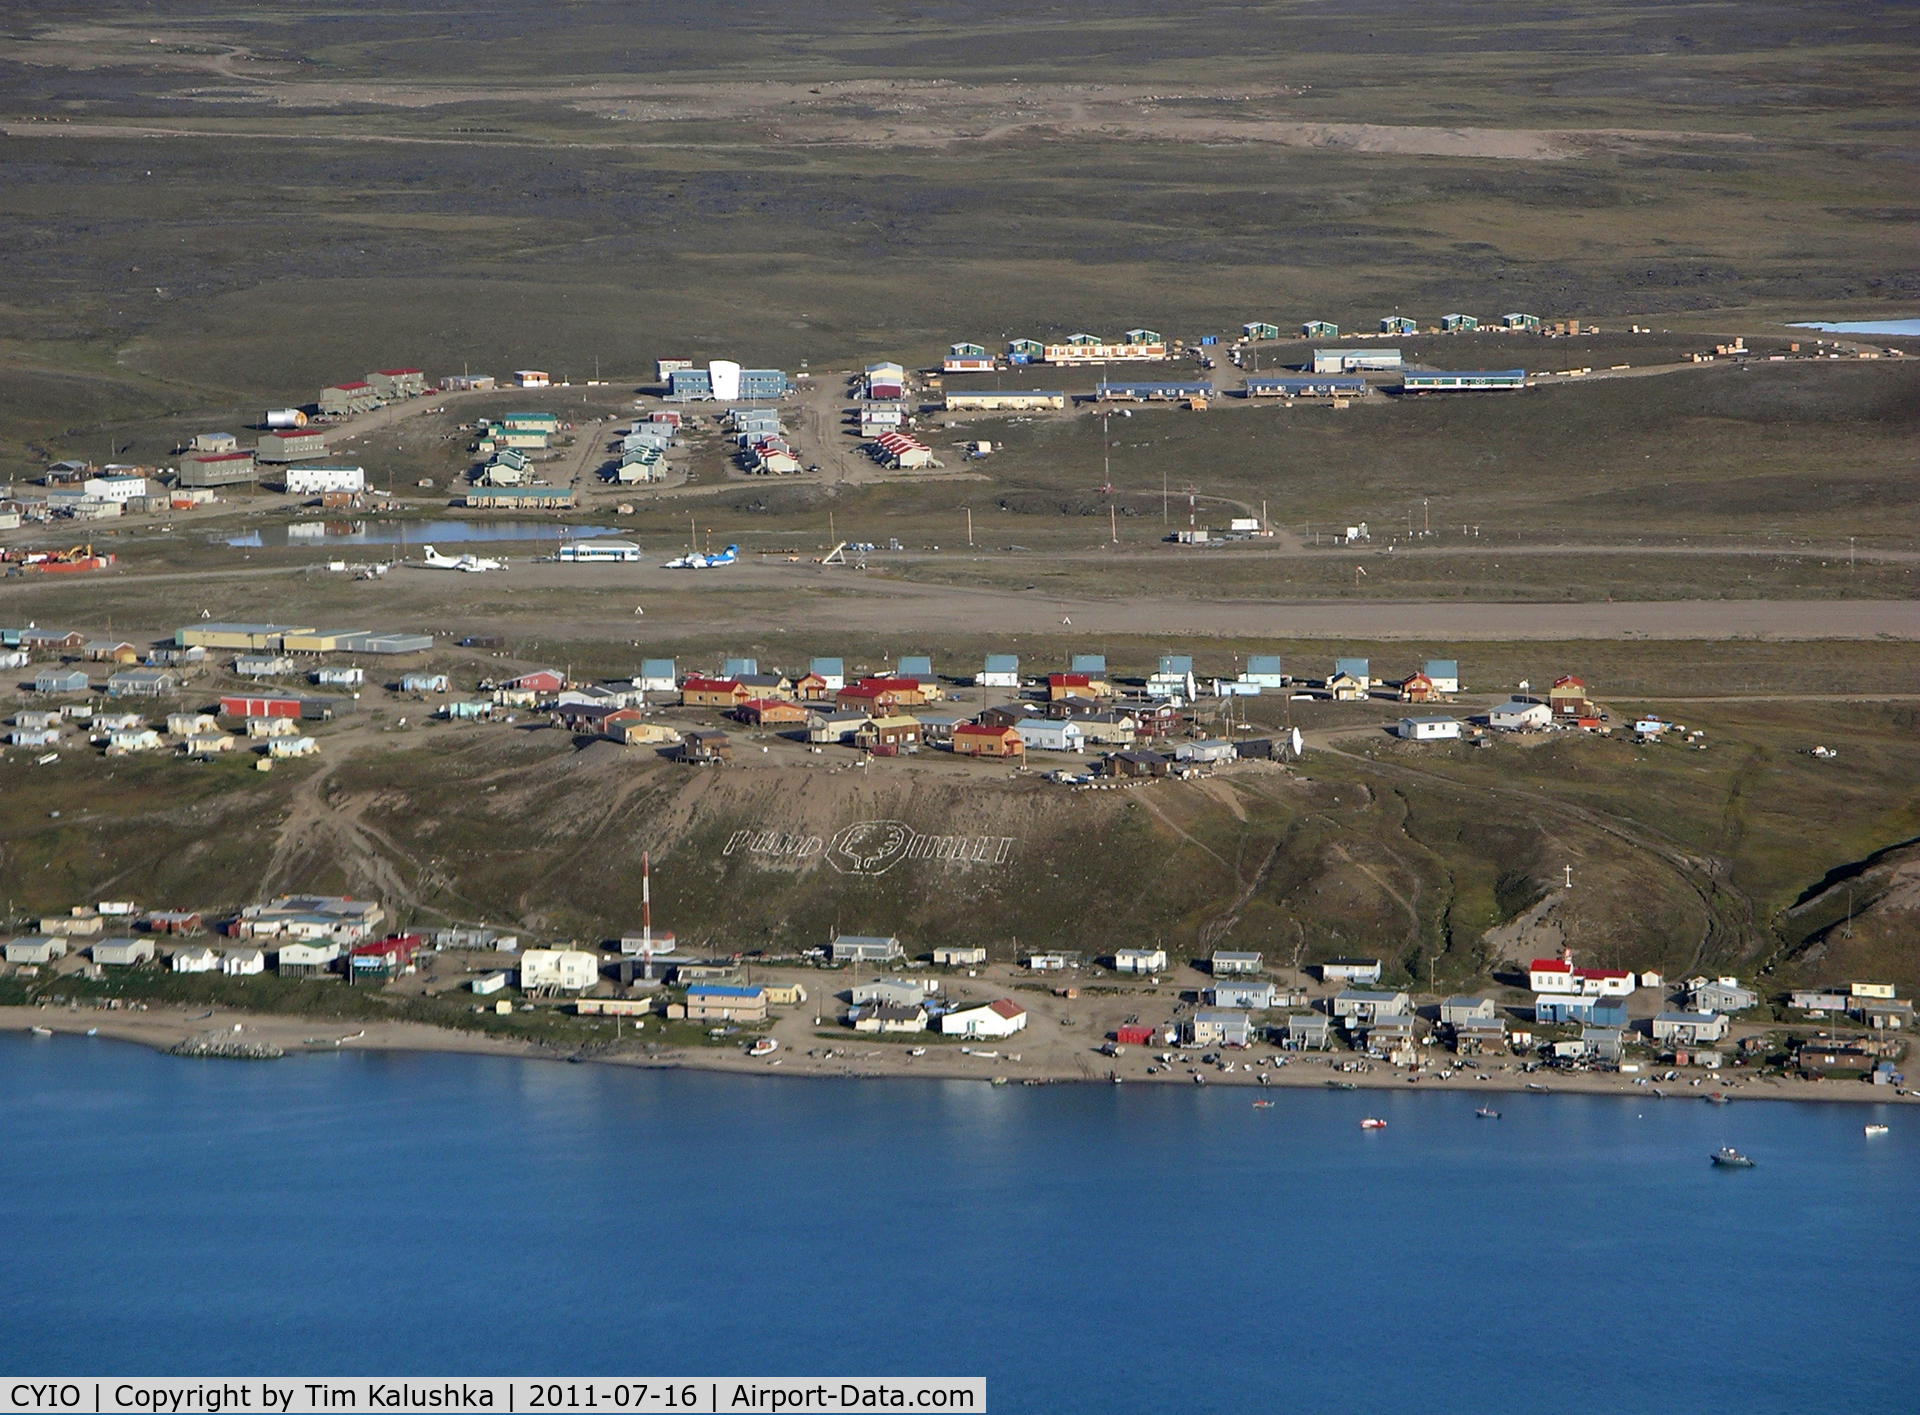 Pond Inlet Airport, Pond Inlet, Nunavut Canada (CYIO) - Looking at Pond Inlet Airport from the west.